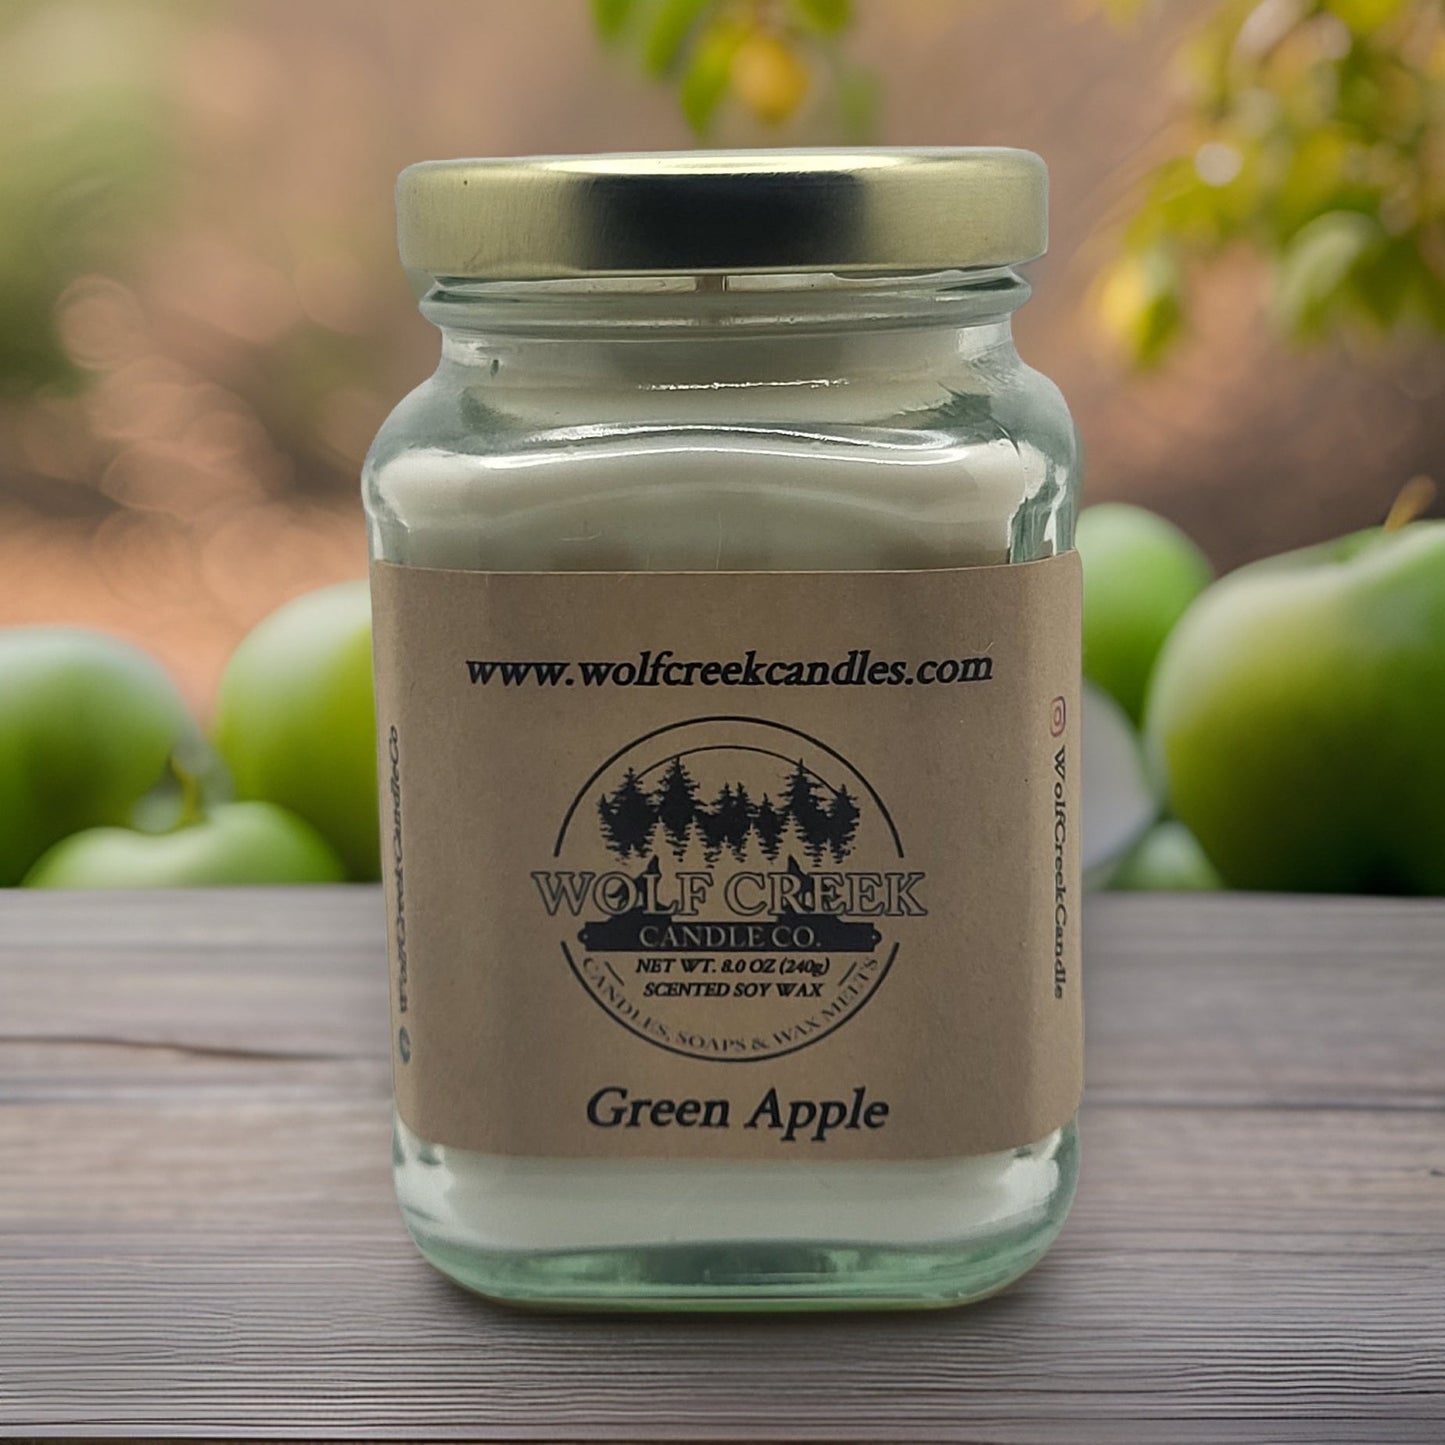 Green Apple Soy Candle - Wolf Creek Candle Co.